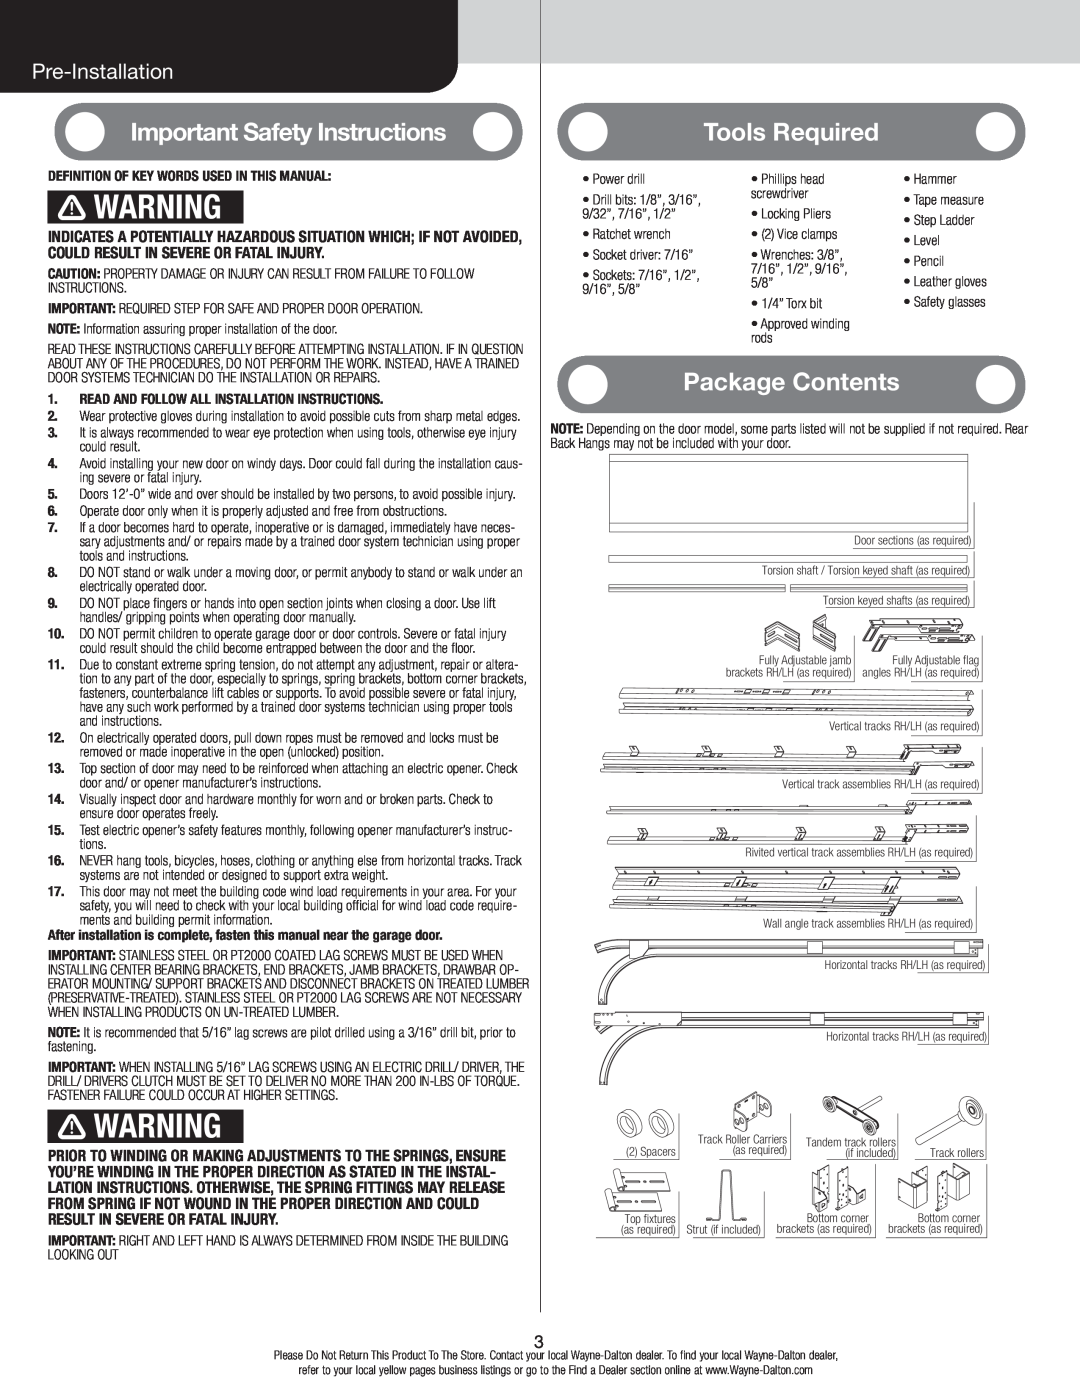 Wayne-Dalton 44 installation instructions Important Safety Instructions, Tools Required, Package Contents, Pre-Installation 